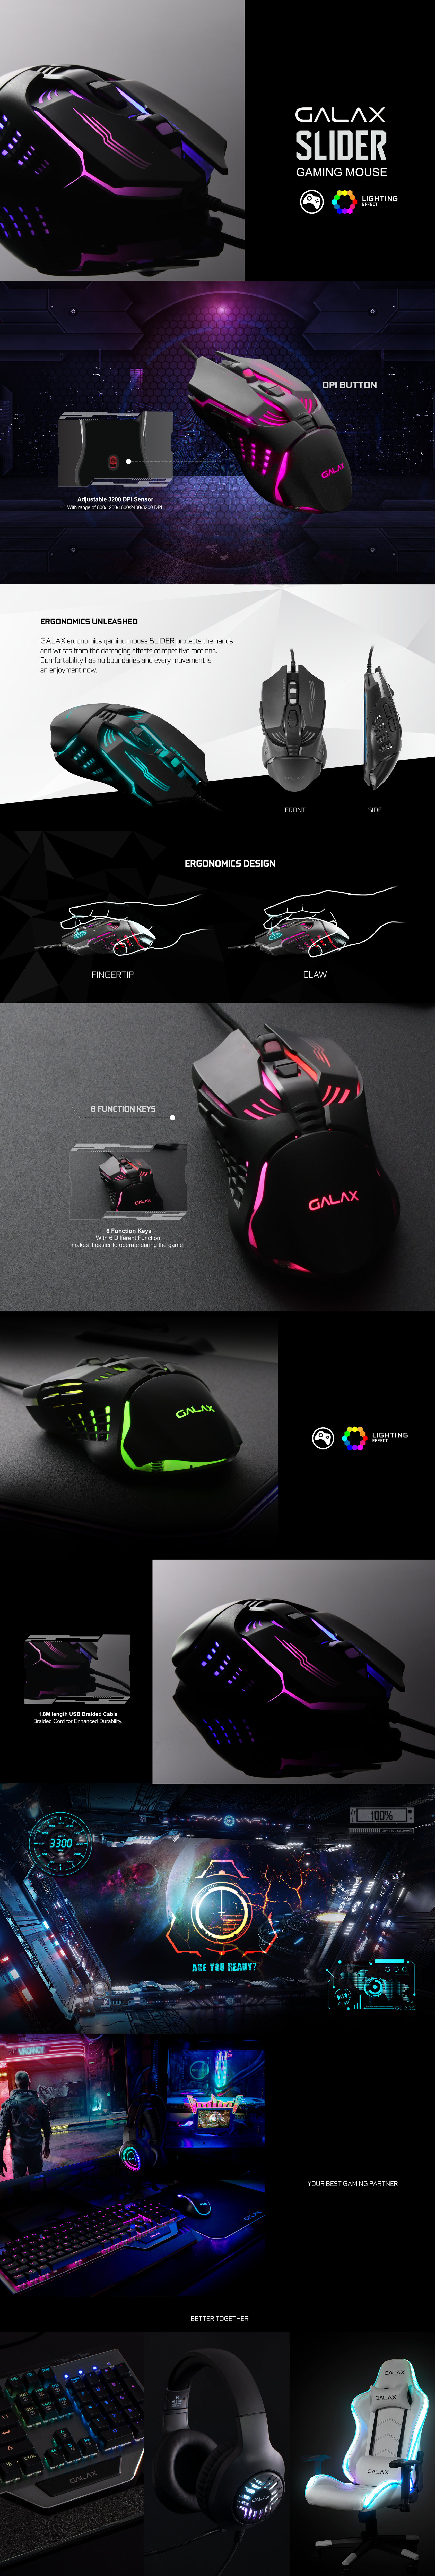 gaming mouse LB1